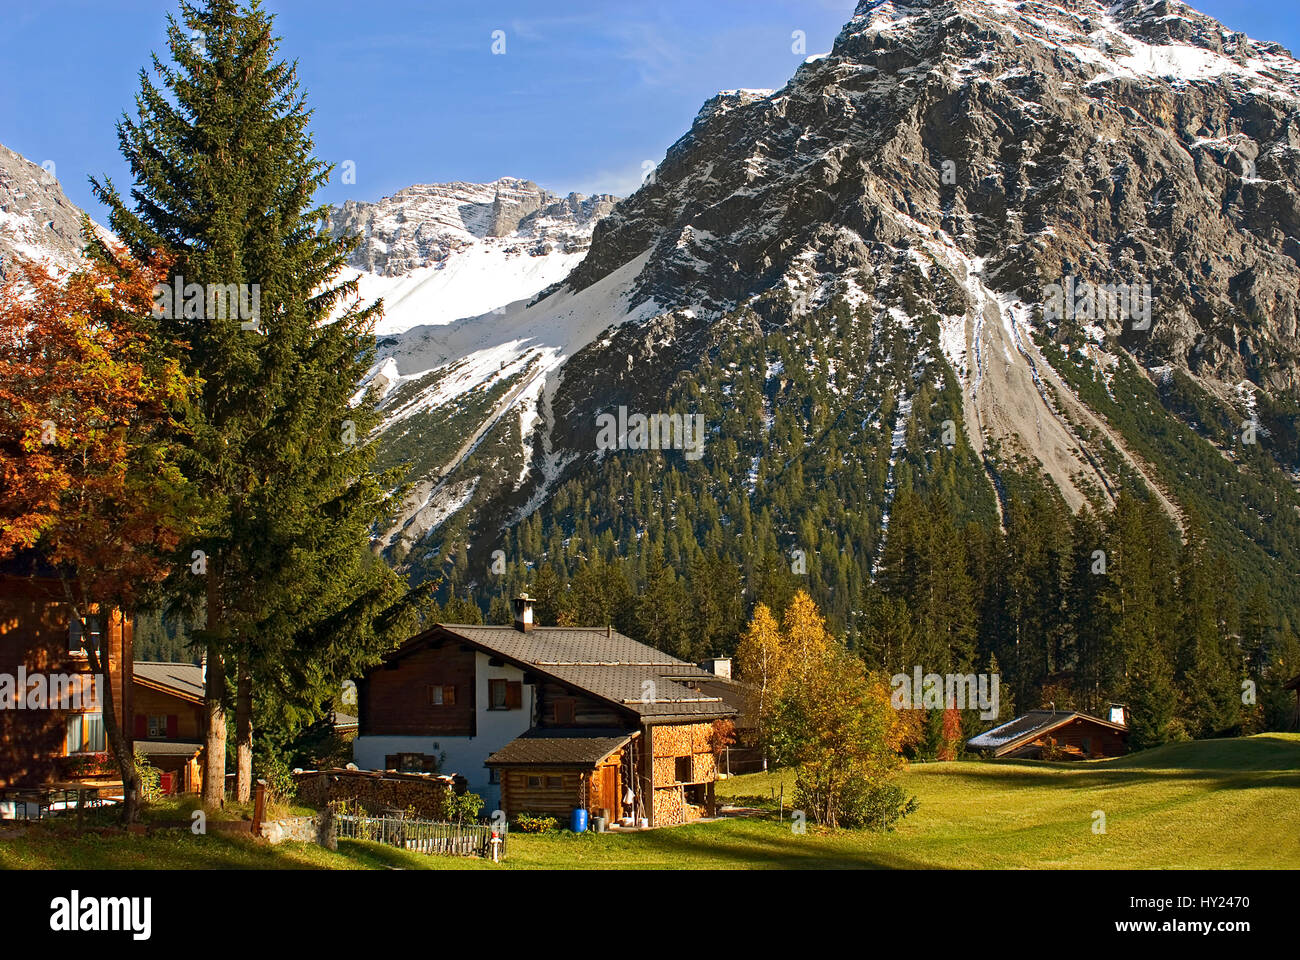 This stock photo shows a typical Swiss wooden house in a Autumn landscape at the small mountain village of Arosa a ski resort in Switzerland. Arosa is Stock Photo